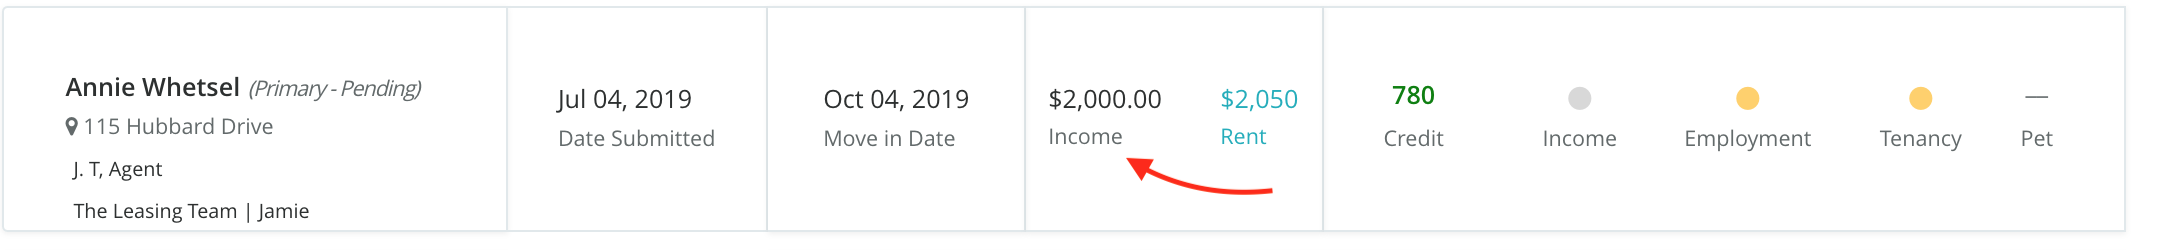 total_income.png